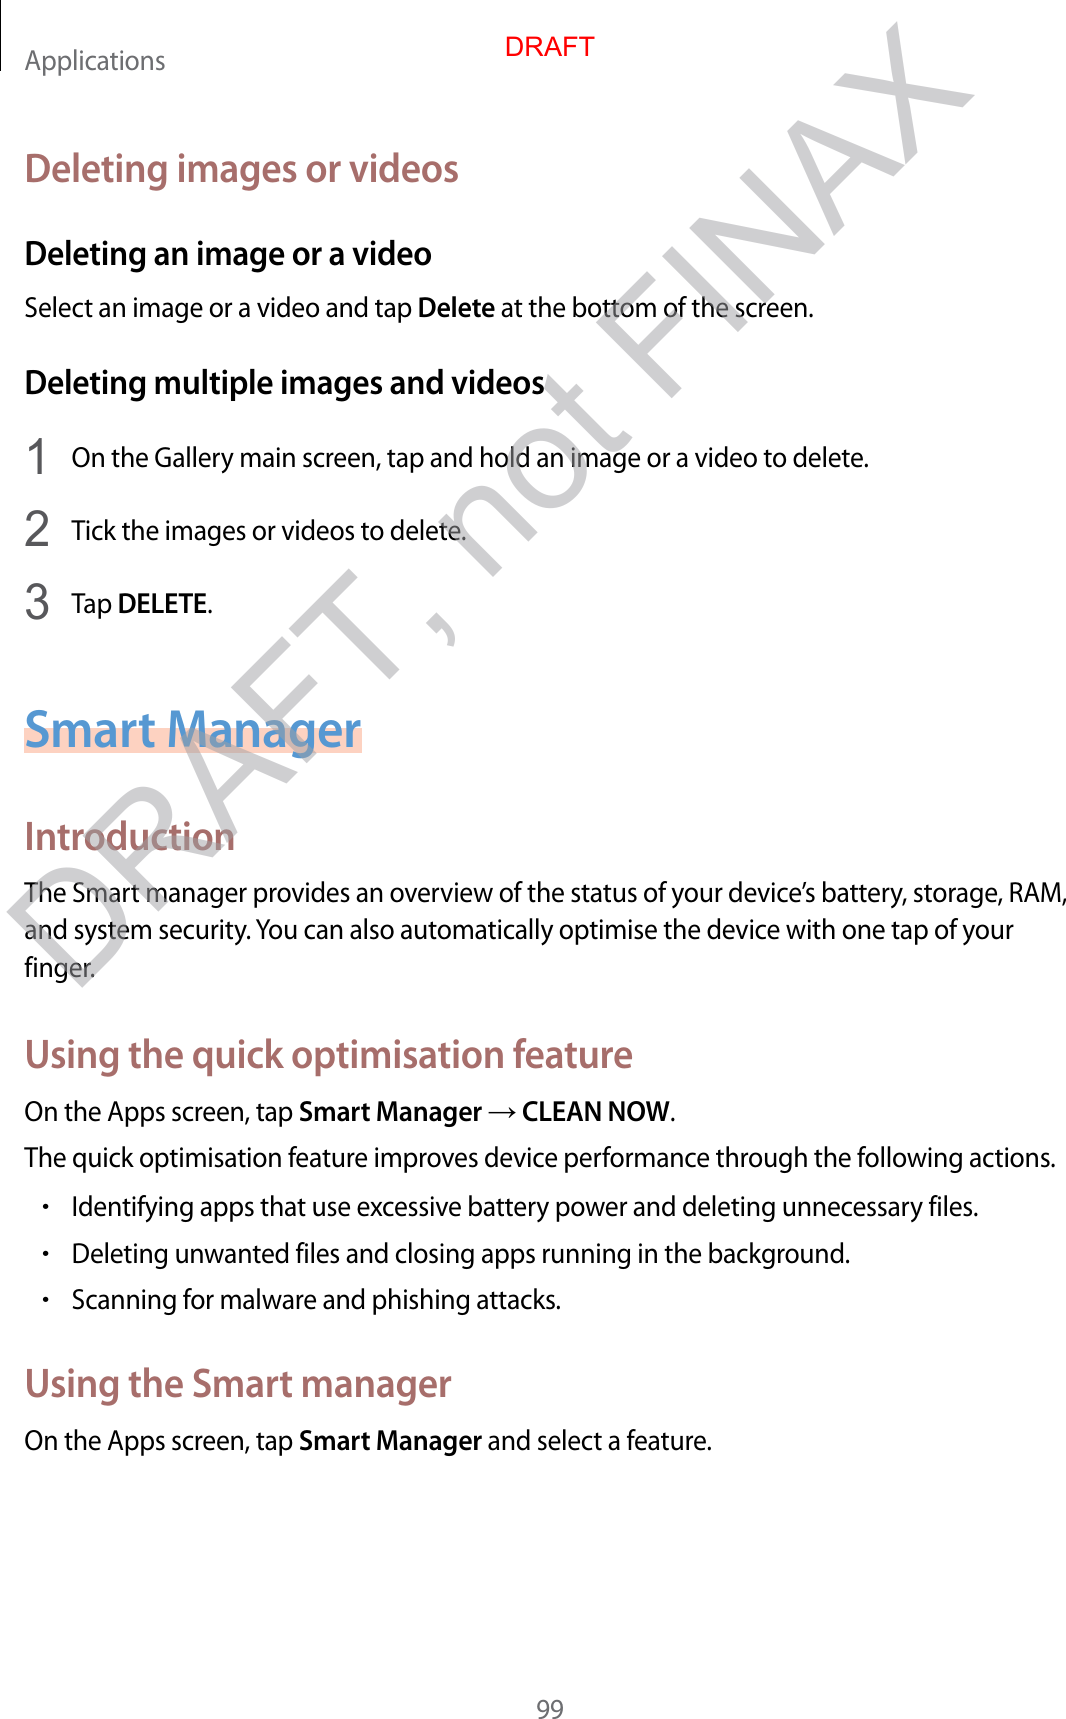 Applications99Deleting images or videosDeleting an image or a videoSelect an image or a video and tap Delete at the bottom of the screen.Deleting multiple images and videos1  On the Gallery main screen, tap and hold an image or a video to delete.2  Tick the images or videos to delete.3  Tap DELETE.Smart ManagerIntroductionThe Smart manager provides an overview of the status of your device’s battery, storage, RAM, and system security. You can also automatically optimise the device with one tap of your finger.Using the quick optimisation featureOn the Apps screen, tap Smart Manager  CLEAN NOW.The quick optimisation feature improves device performance through the following actions.•Identifying apps that use excessive battery power and deleting unnecessary files.•Deleting unwanted files and closing apps running in the background.•Scanning for malware and phishing attacks.Using the Smart managerOn the Apps screen, tap Smart Manager and select a feature.DRAFTDRAFT, not FINAX